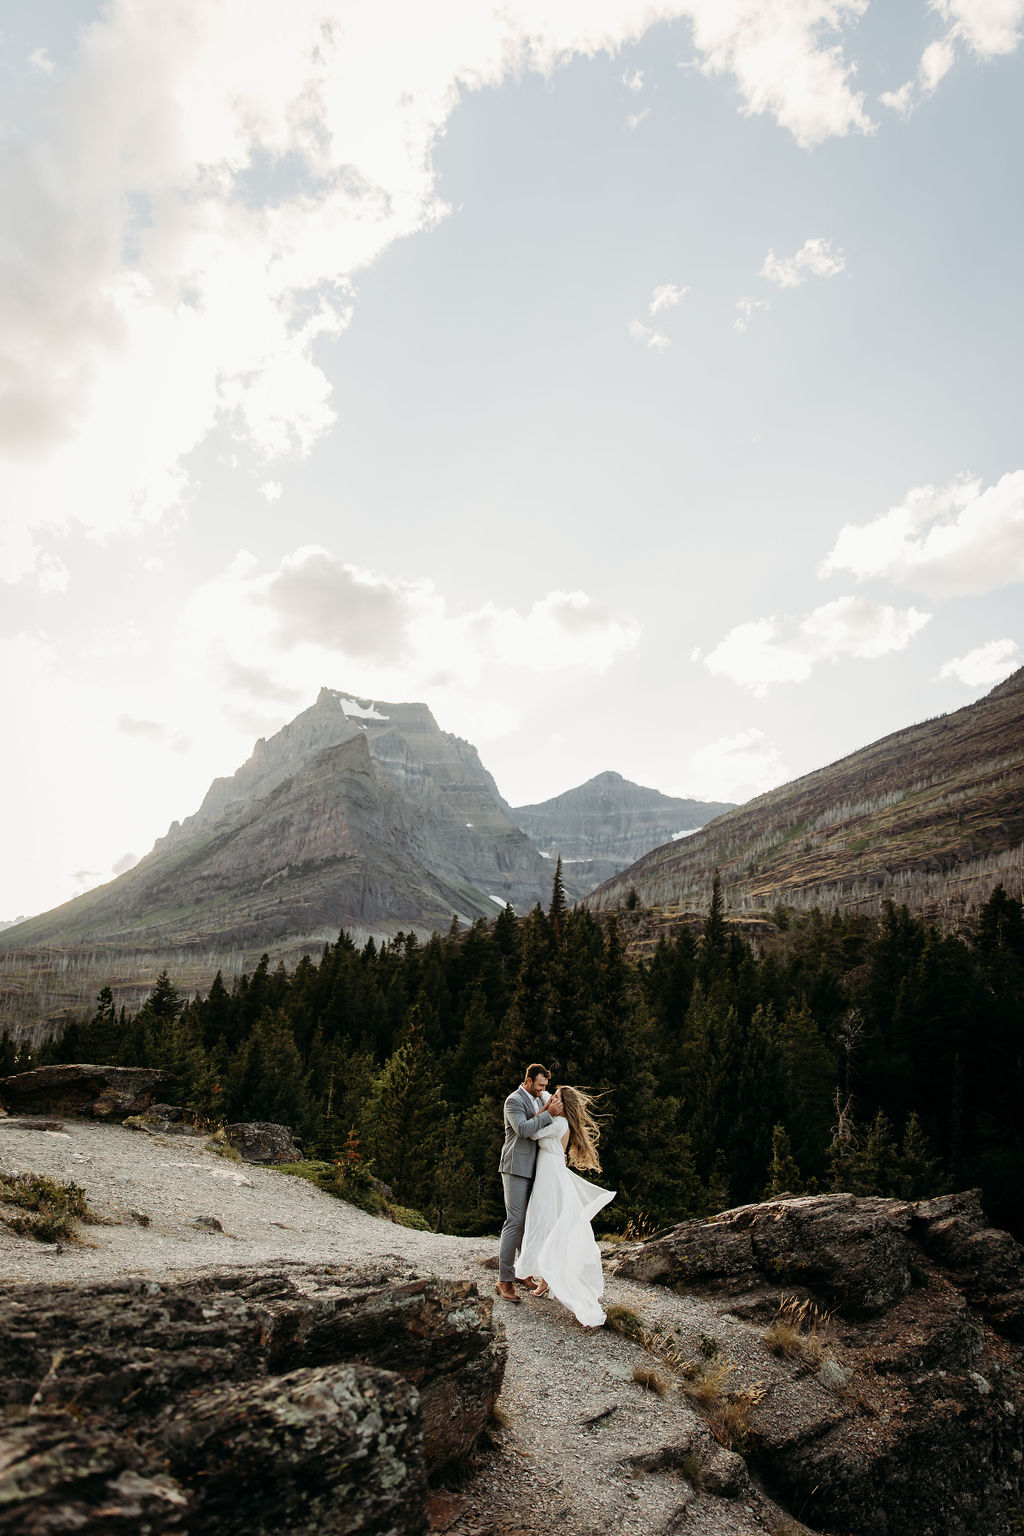 A couple walks hand in hand along a scenic lakeside trail with towering mountains in the background at Glacier National park